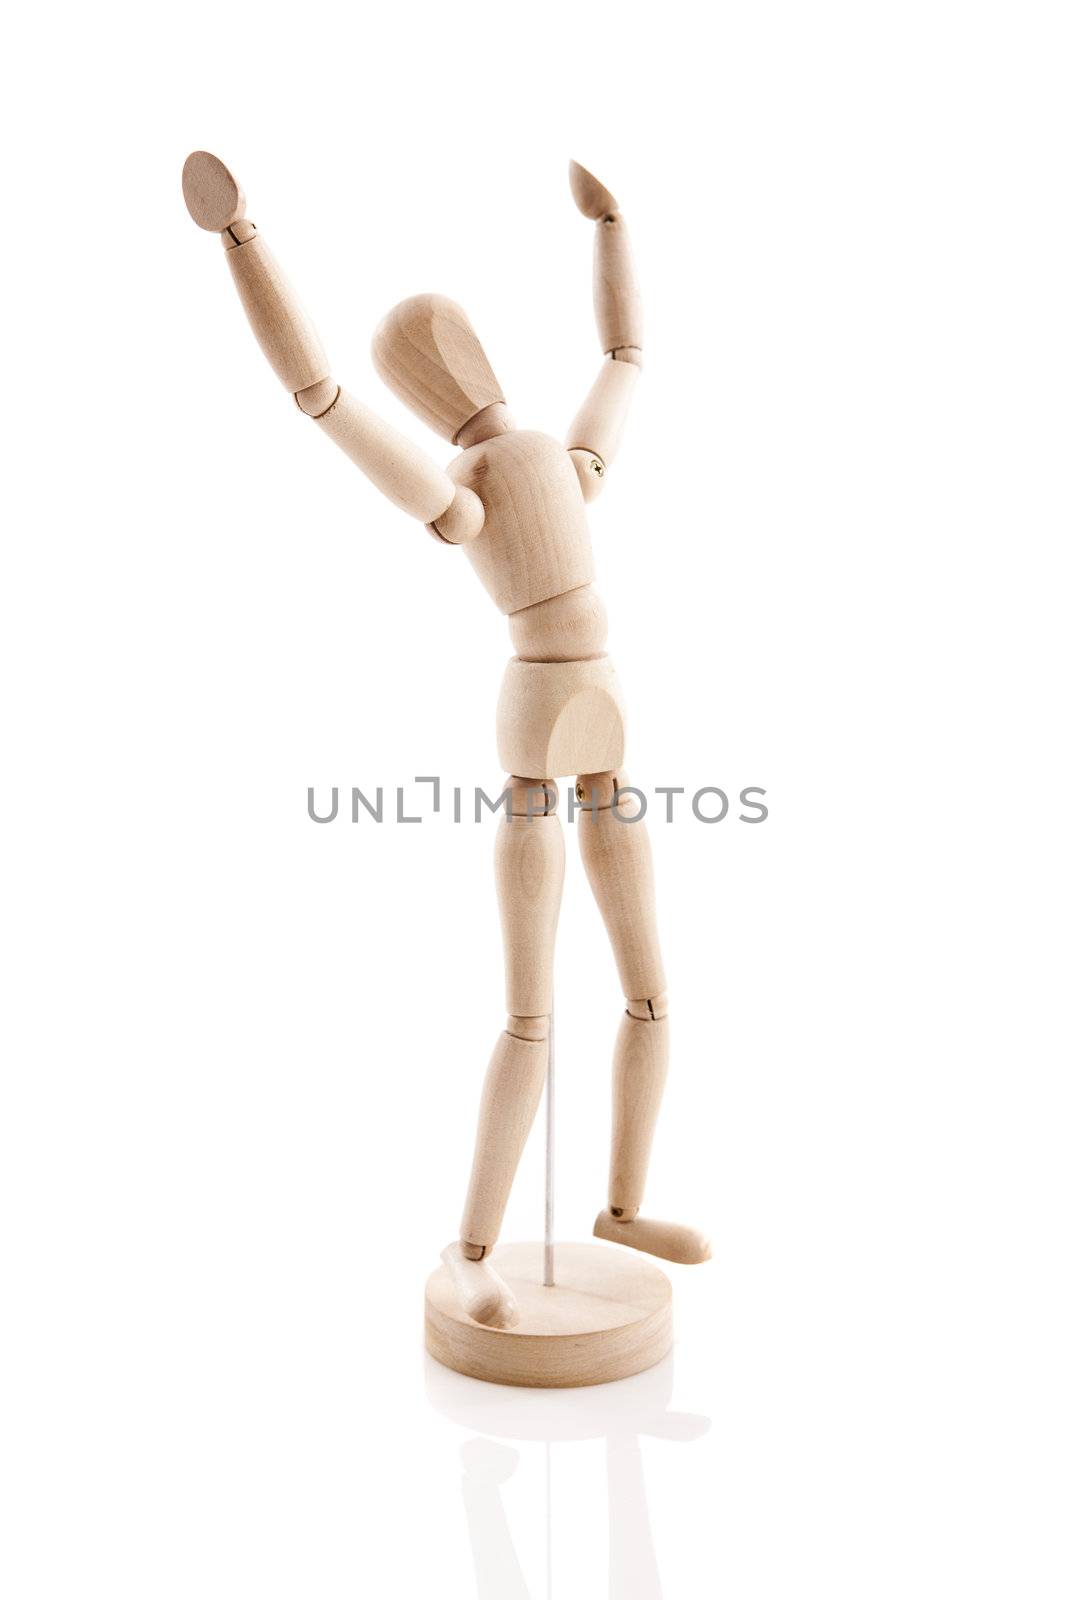 Articulated wooden toy isolated on white background